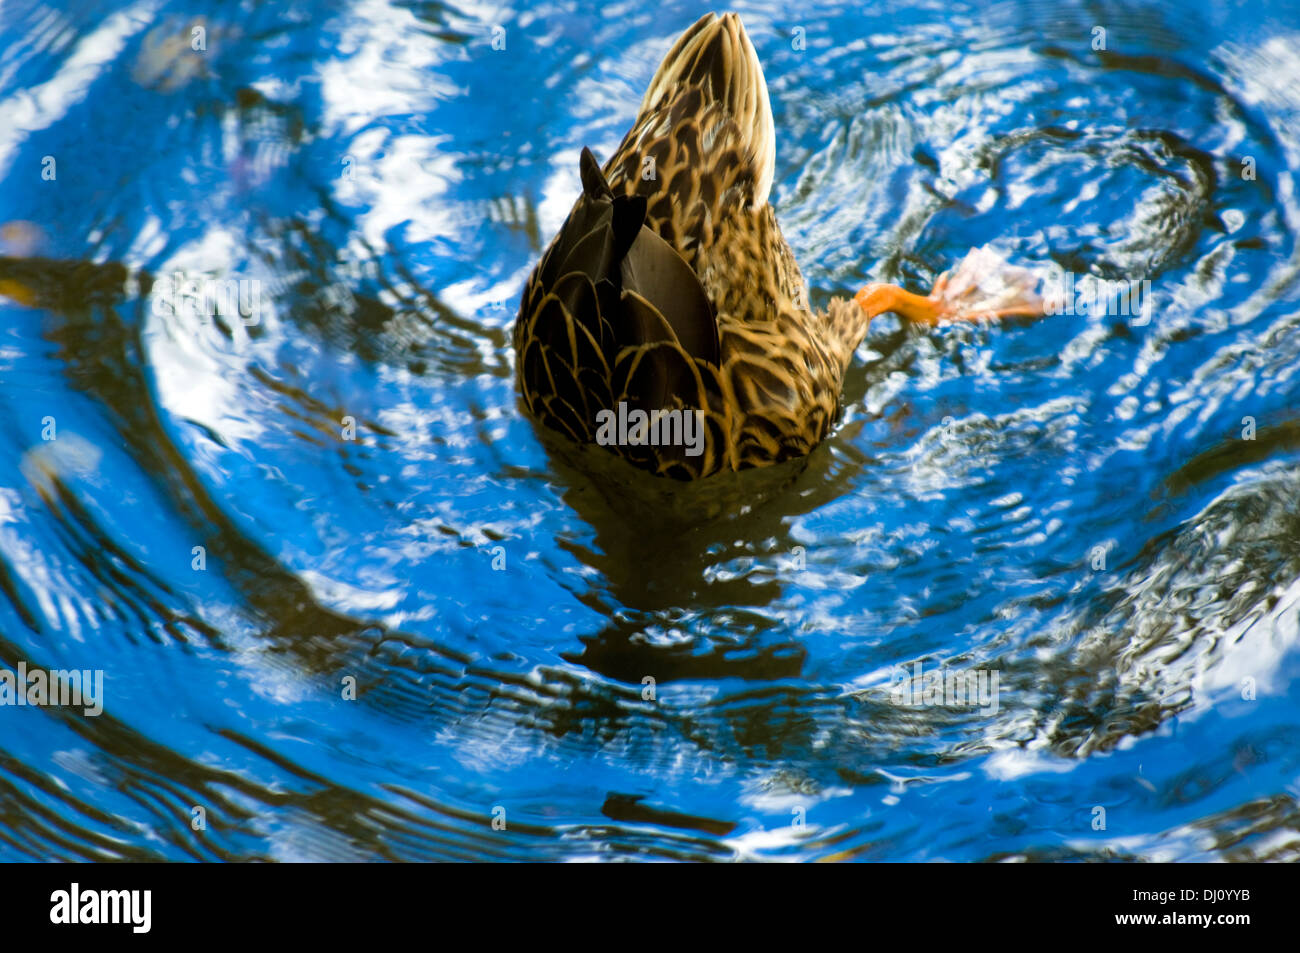 Fishing diving duck, upside down with its' tail in the air, searches for a meal. Stock Photo